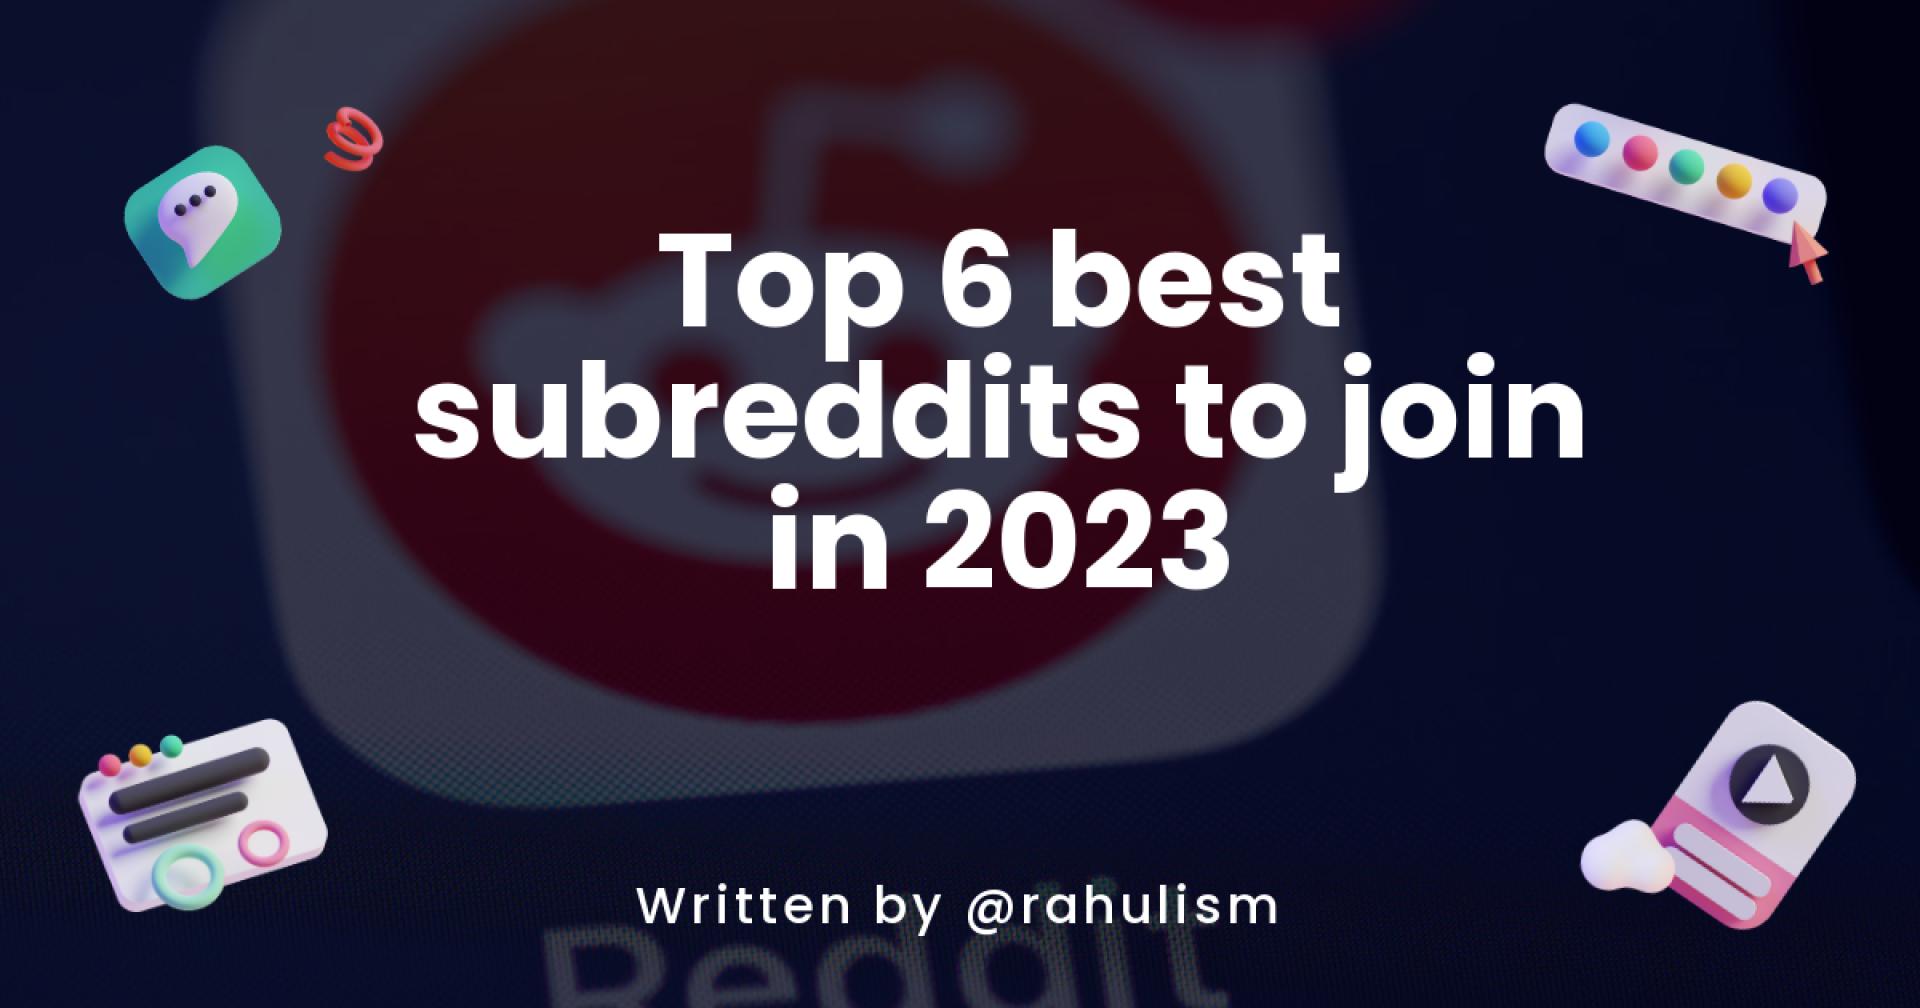 Top 6 best subreddits to join in 2023